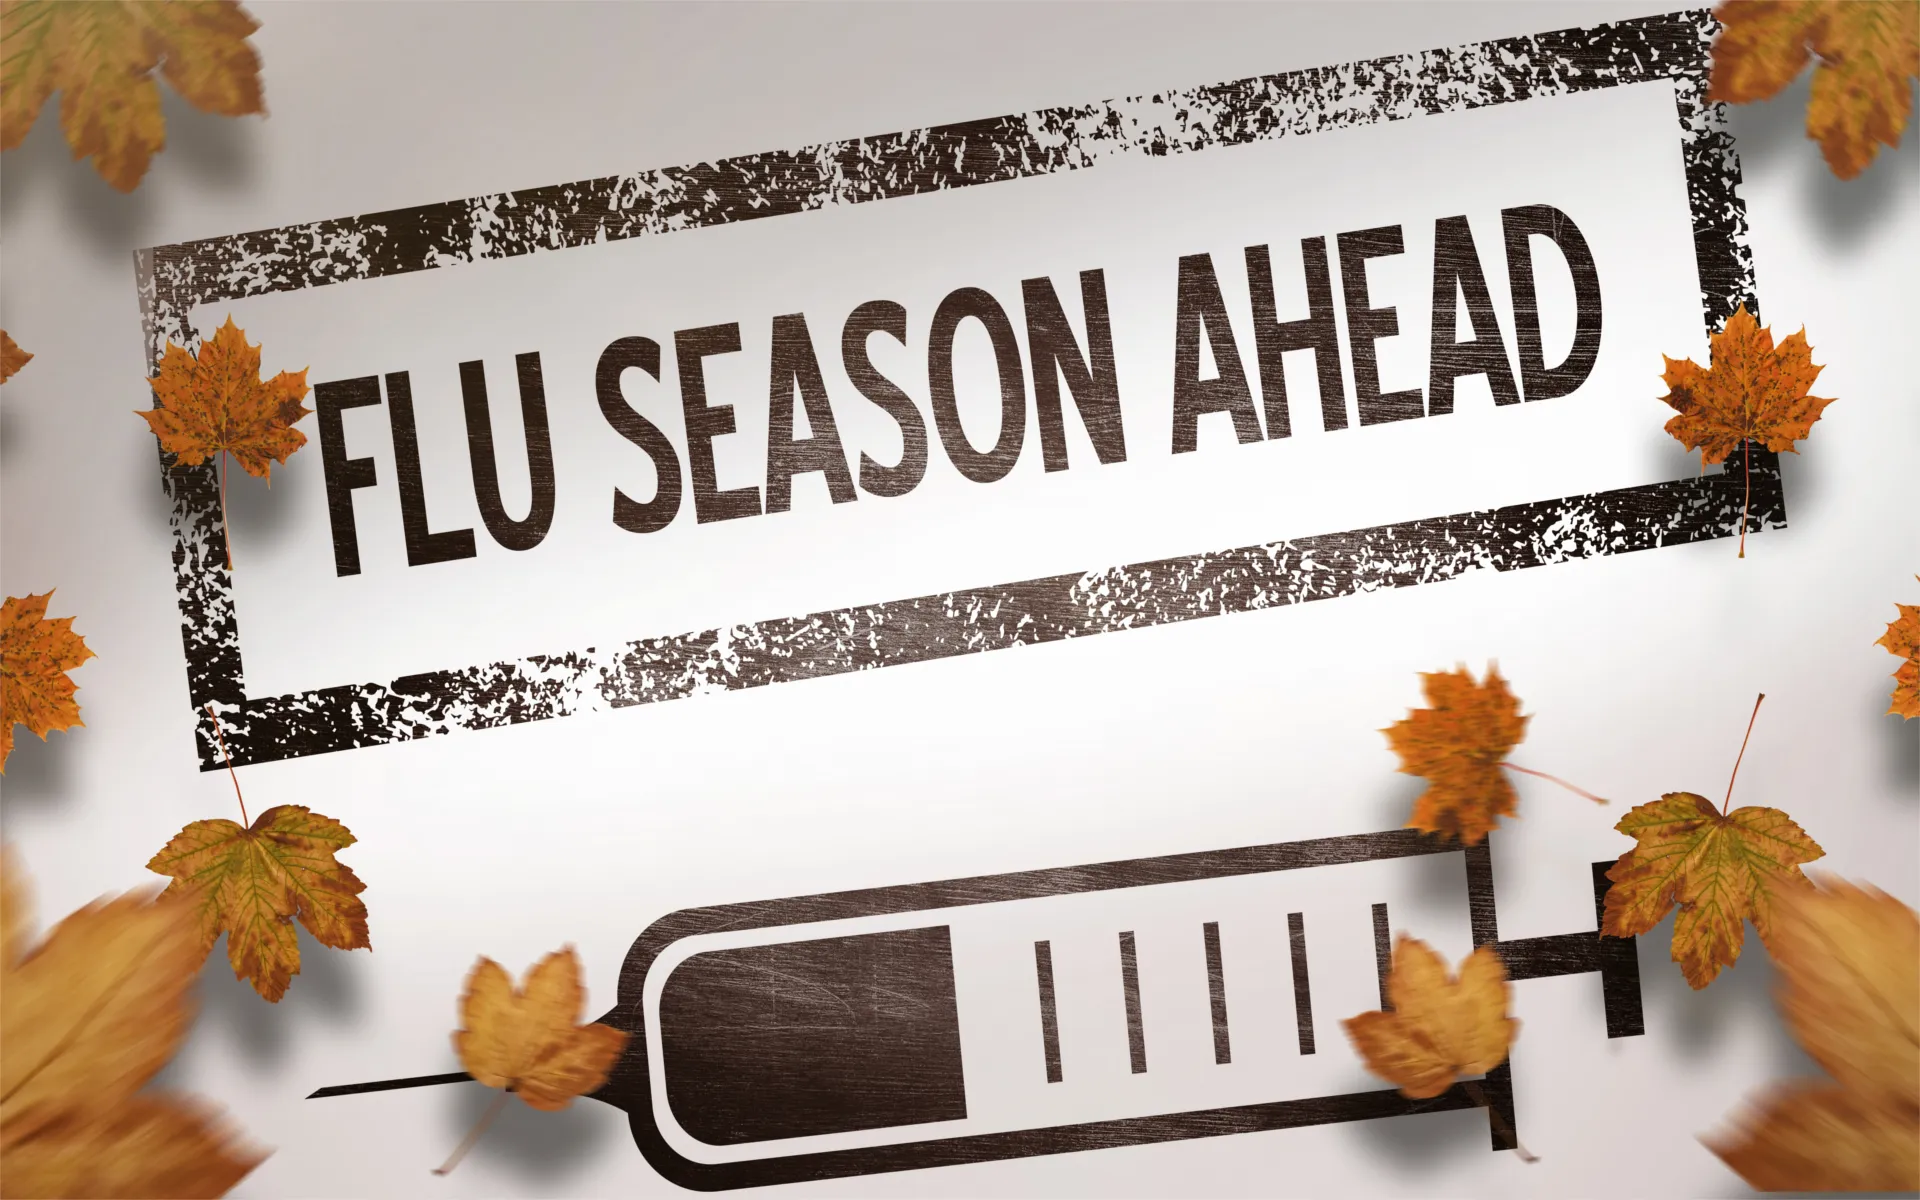 Flu Season: Why You Should Vaccinate Your Kids